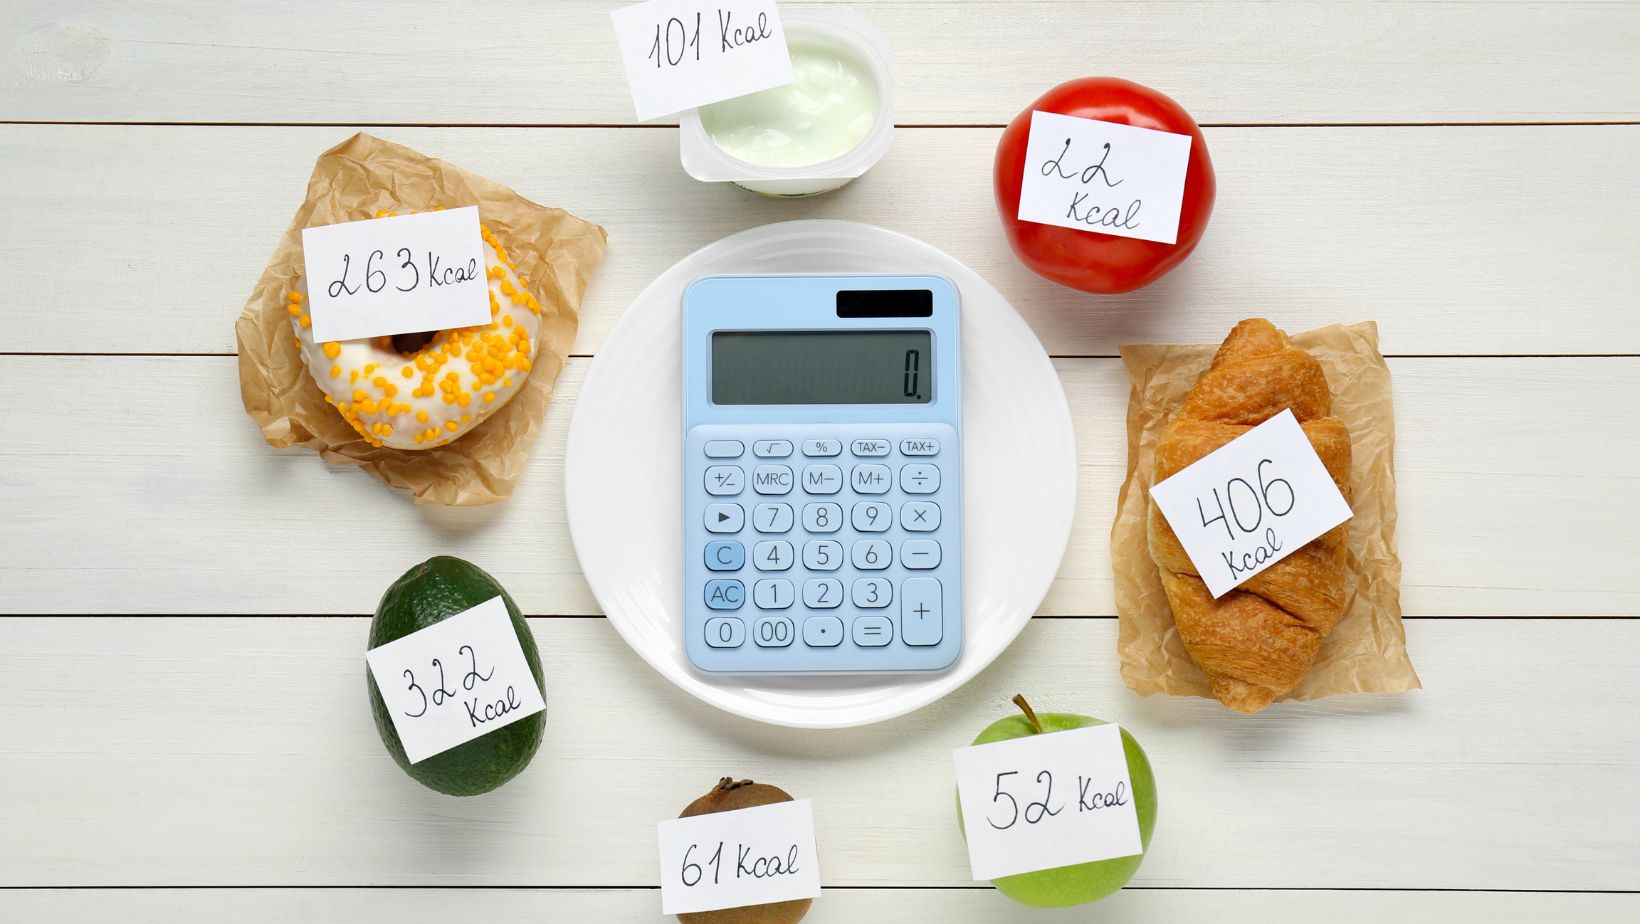 Food with the calorie amounts written on them in memo stick pad style surrounding a calculator on a plate